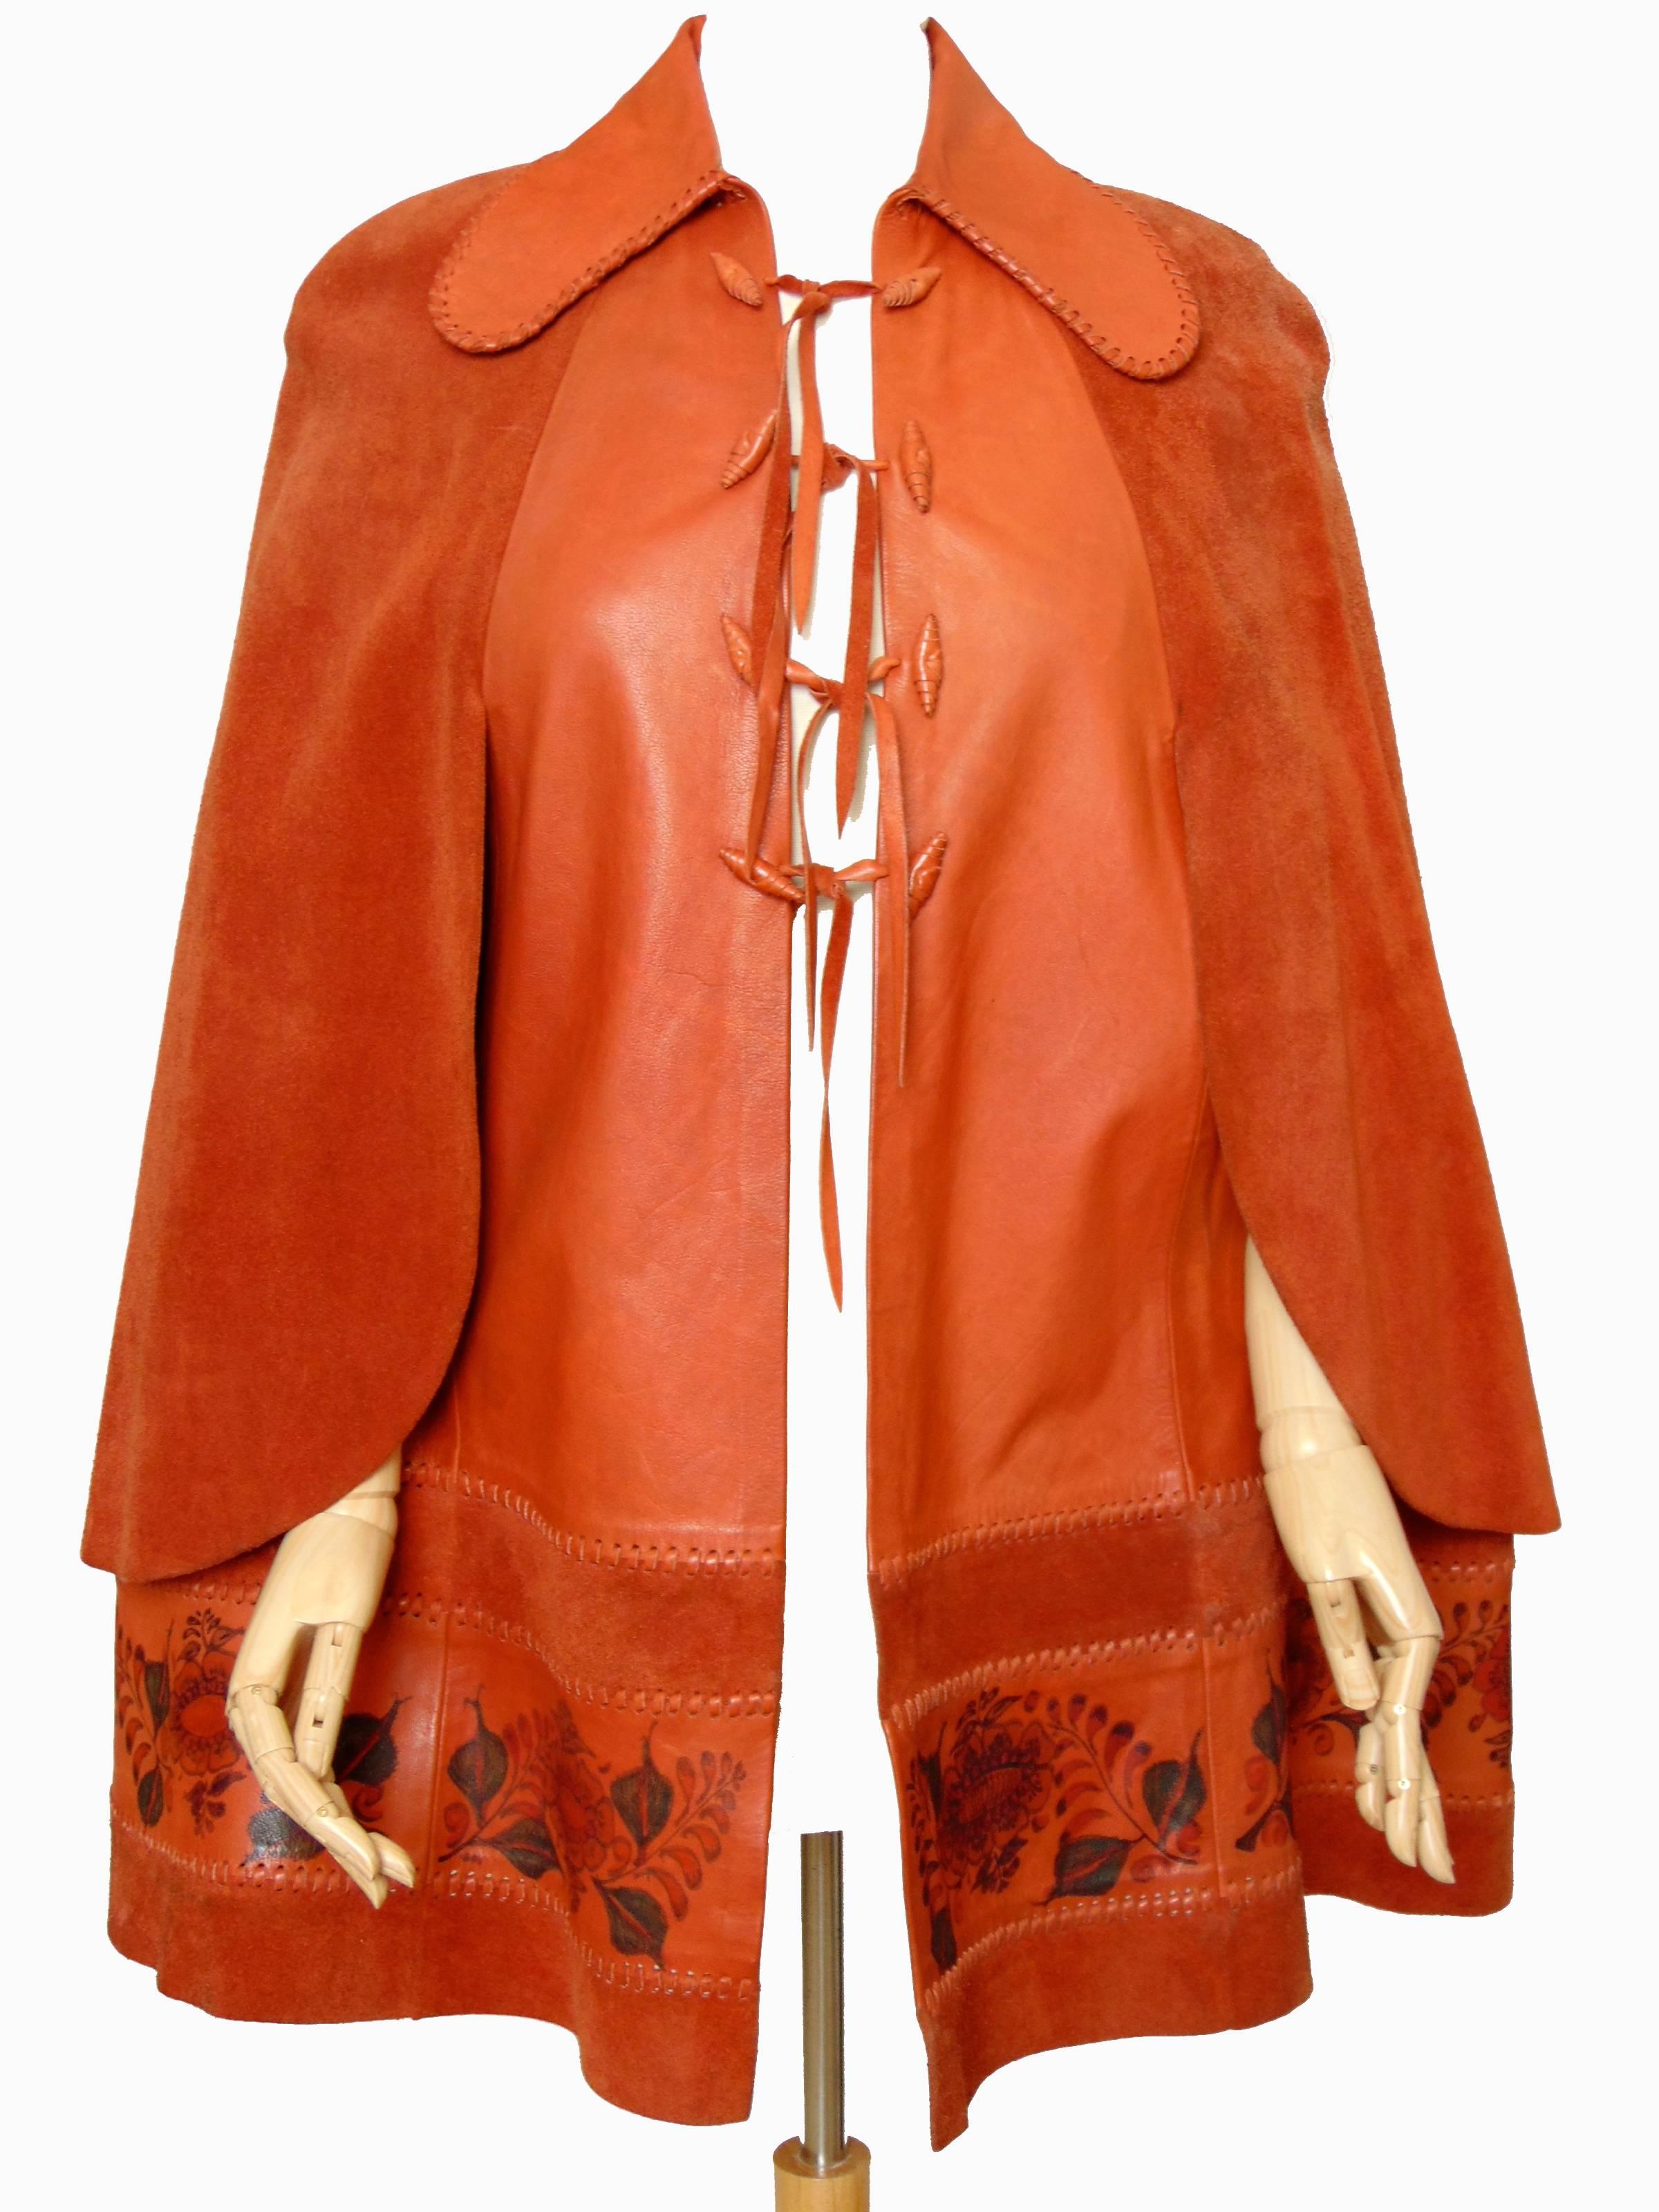 This stunning leather cape was designed by Char, Charlotte Blankenship de Vasquez, most likely in the early 1970s.  Char's original pieces are getting more and more difficult to find, and this piece is one of the few currently available online. It